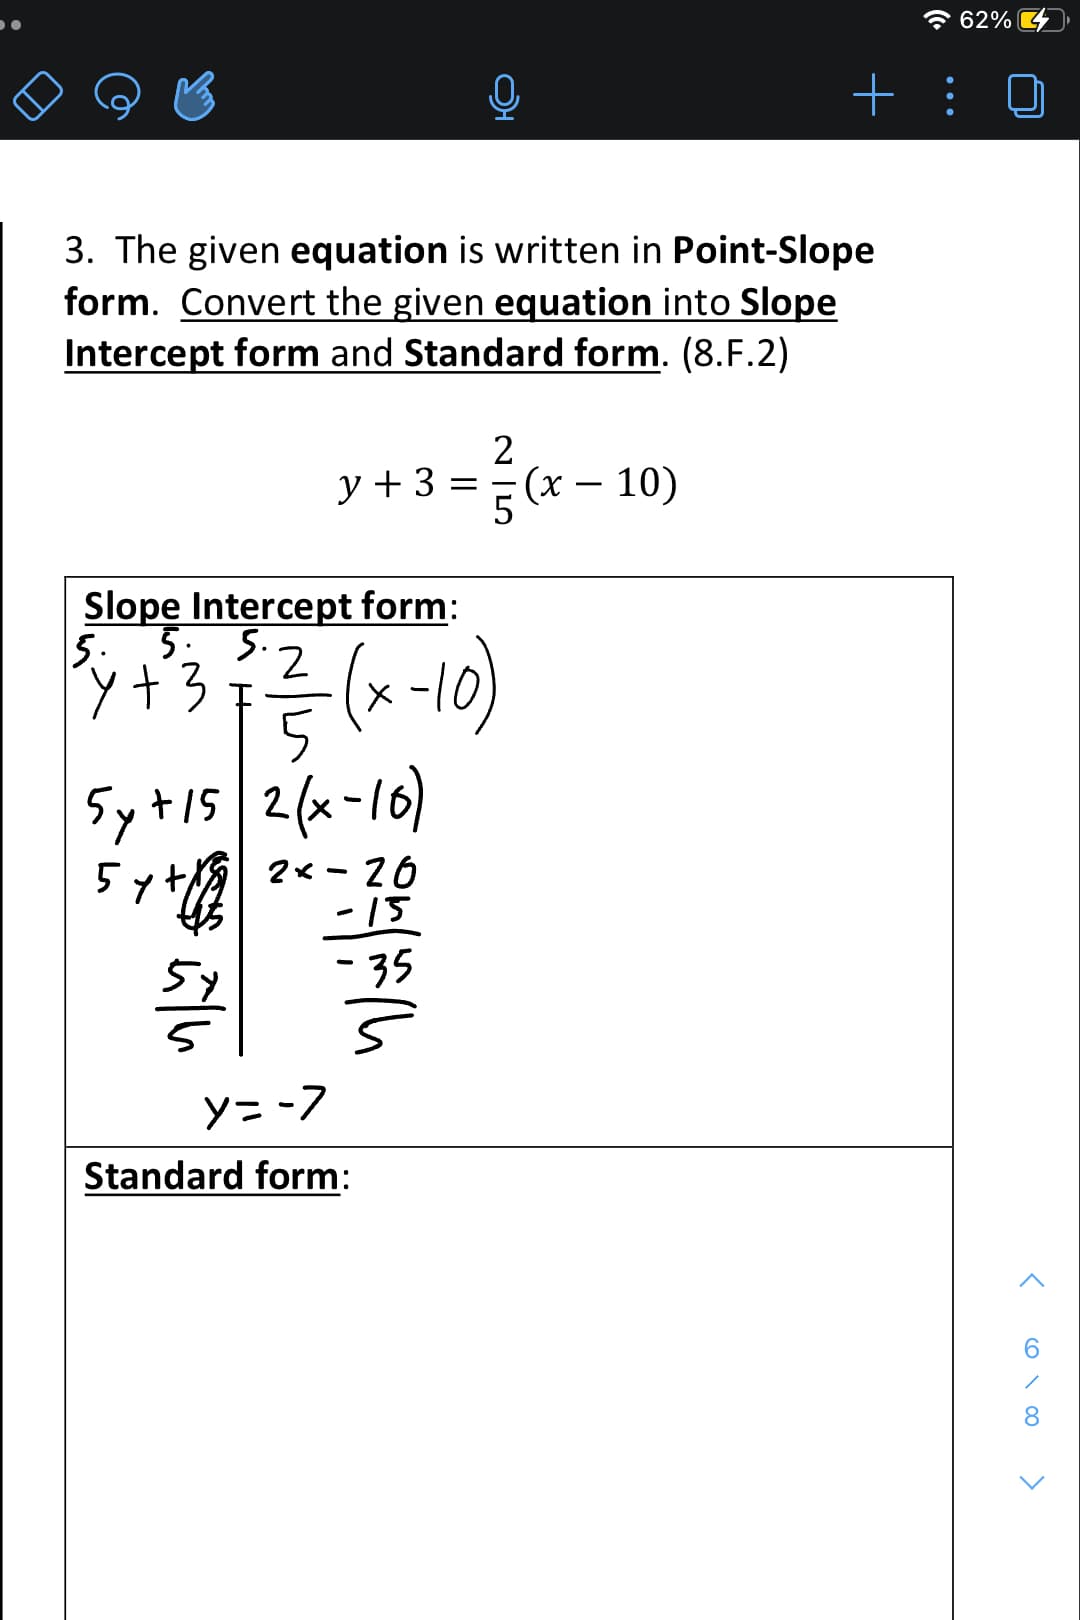 3. The given equation is written in Point-Slope
form. Convert the given equation into Slope
Intercept form and Standard form. (8.F.2)
1
y + 3 = =
Slope Intercept form:
5. 5. 5.
y
³4 +² 3 ² 2²/²/- (x - 10)
5
5y + 15 2(x-10)
5
2x26
-15
-35
5
2
5 (x - 10)
y=-7
Standard form:
62%
+:
< 60.00